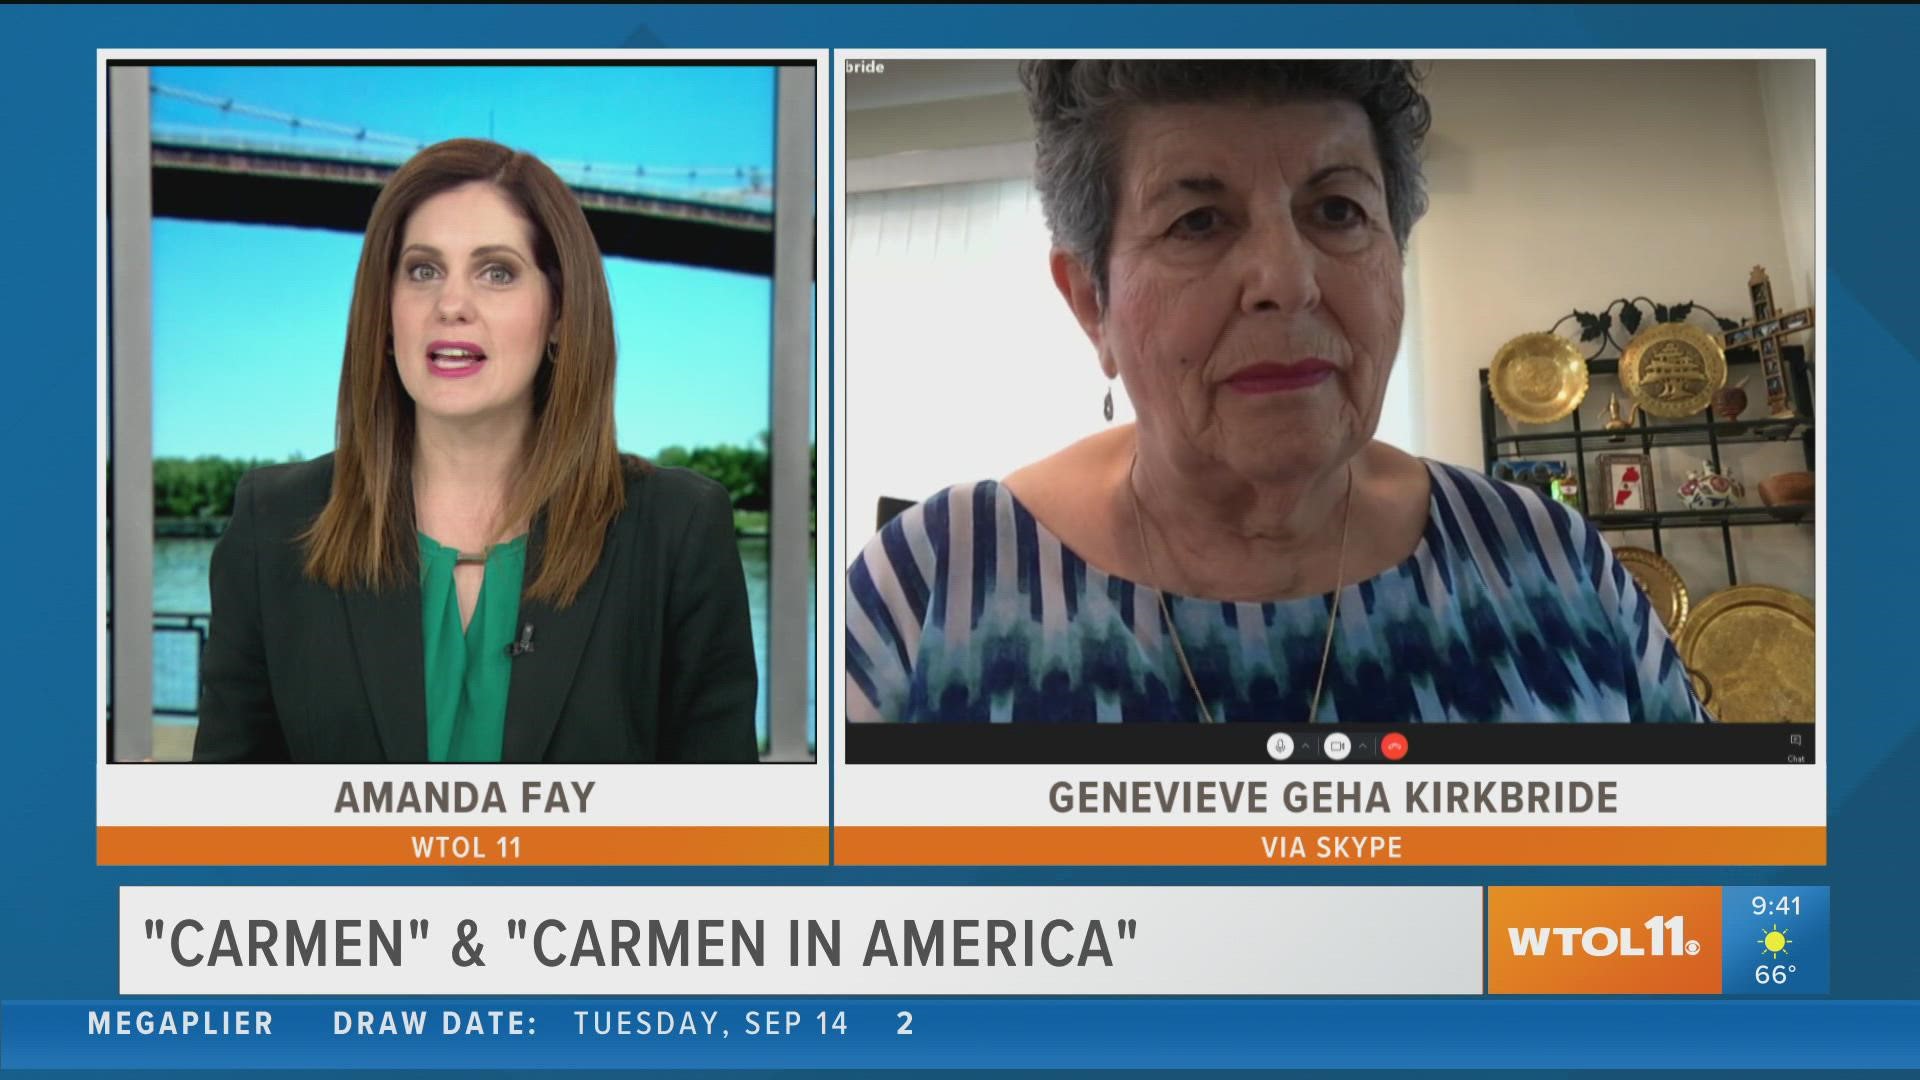 Genevieve Geha Kirkbride has taken her family's story and written it into compelling books “Carmen” and “Carmen in America.”